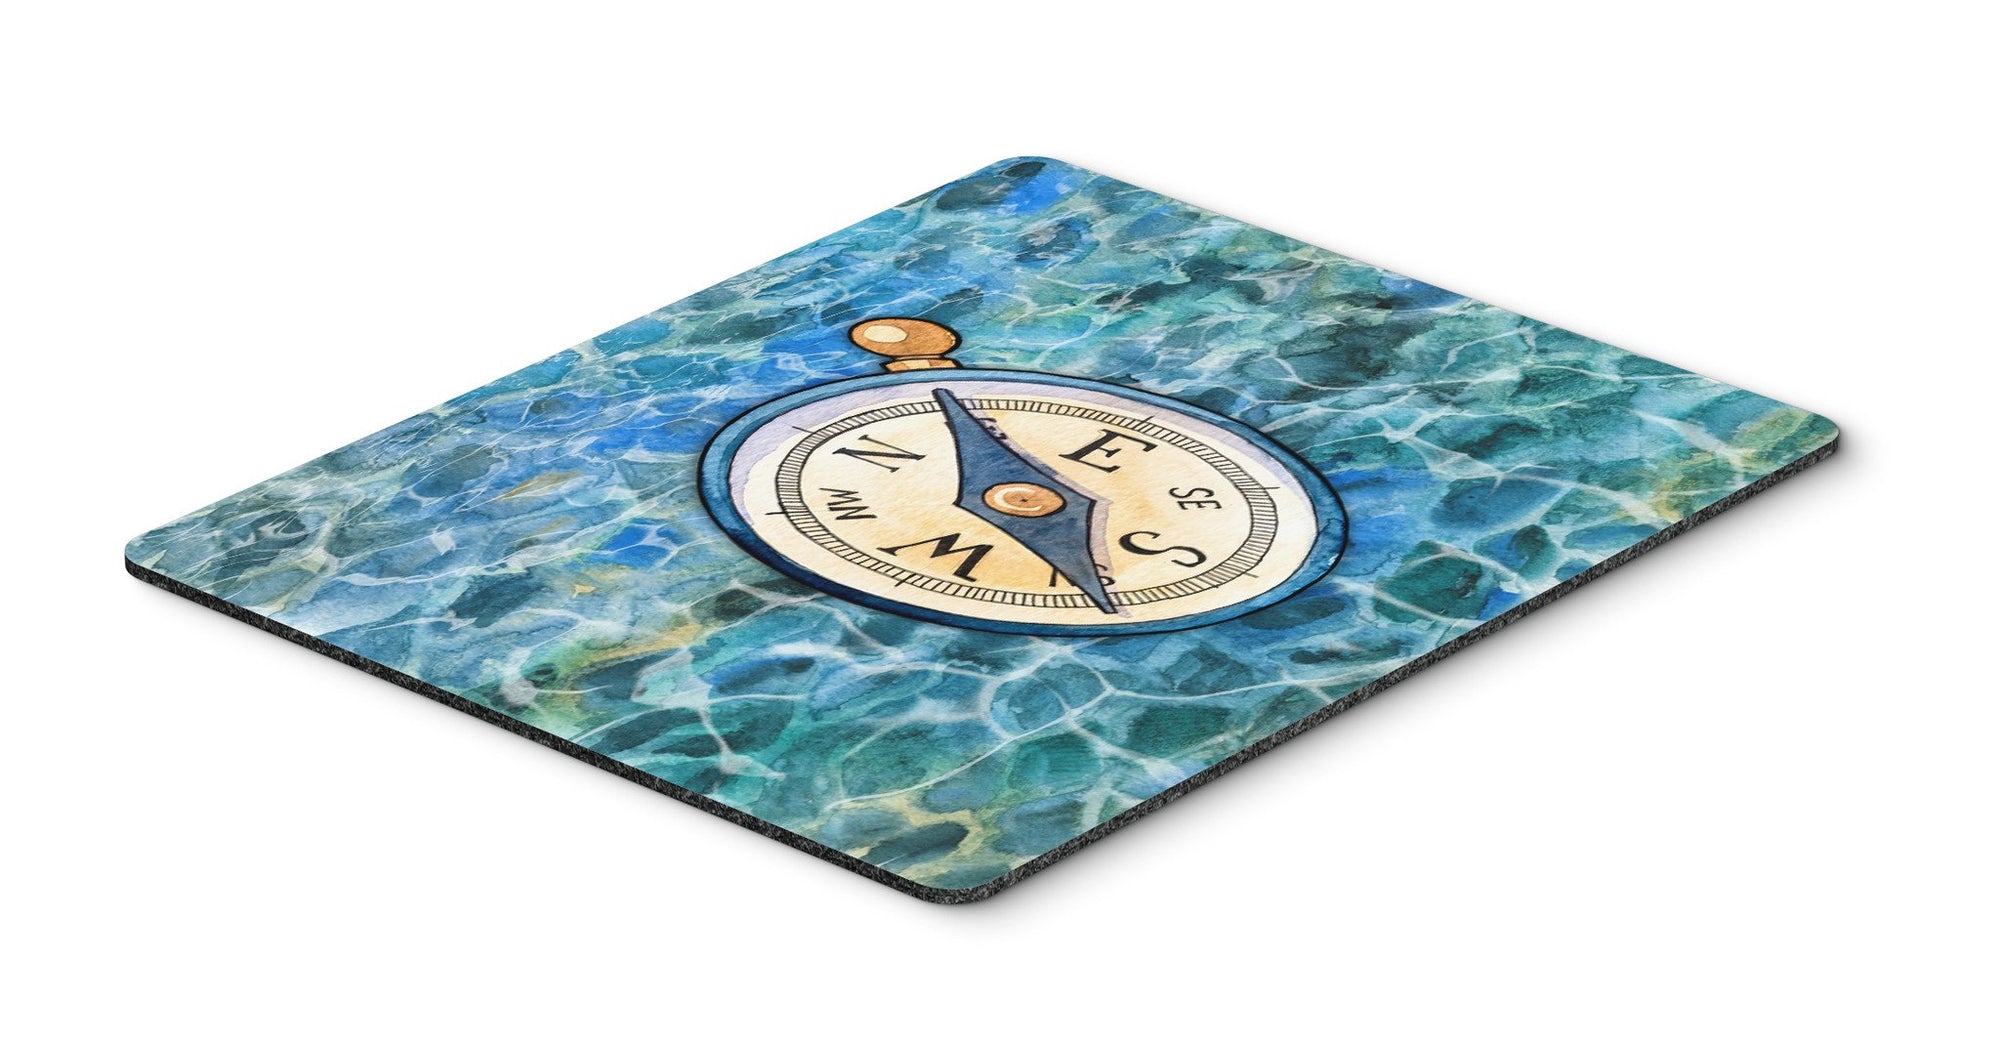 Compass Mouse Pad, Hot Pad or Trivet BB5347MP by Caroline's Treasures